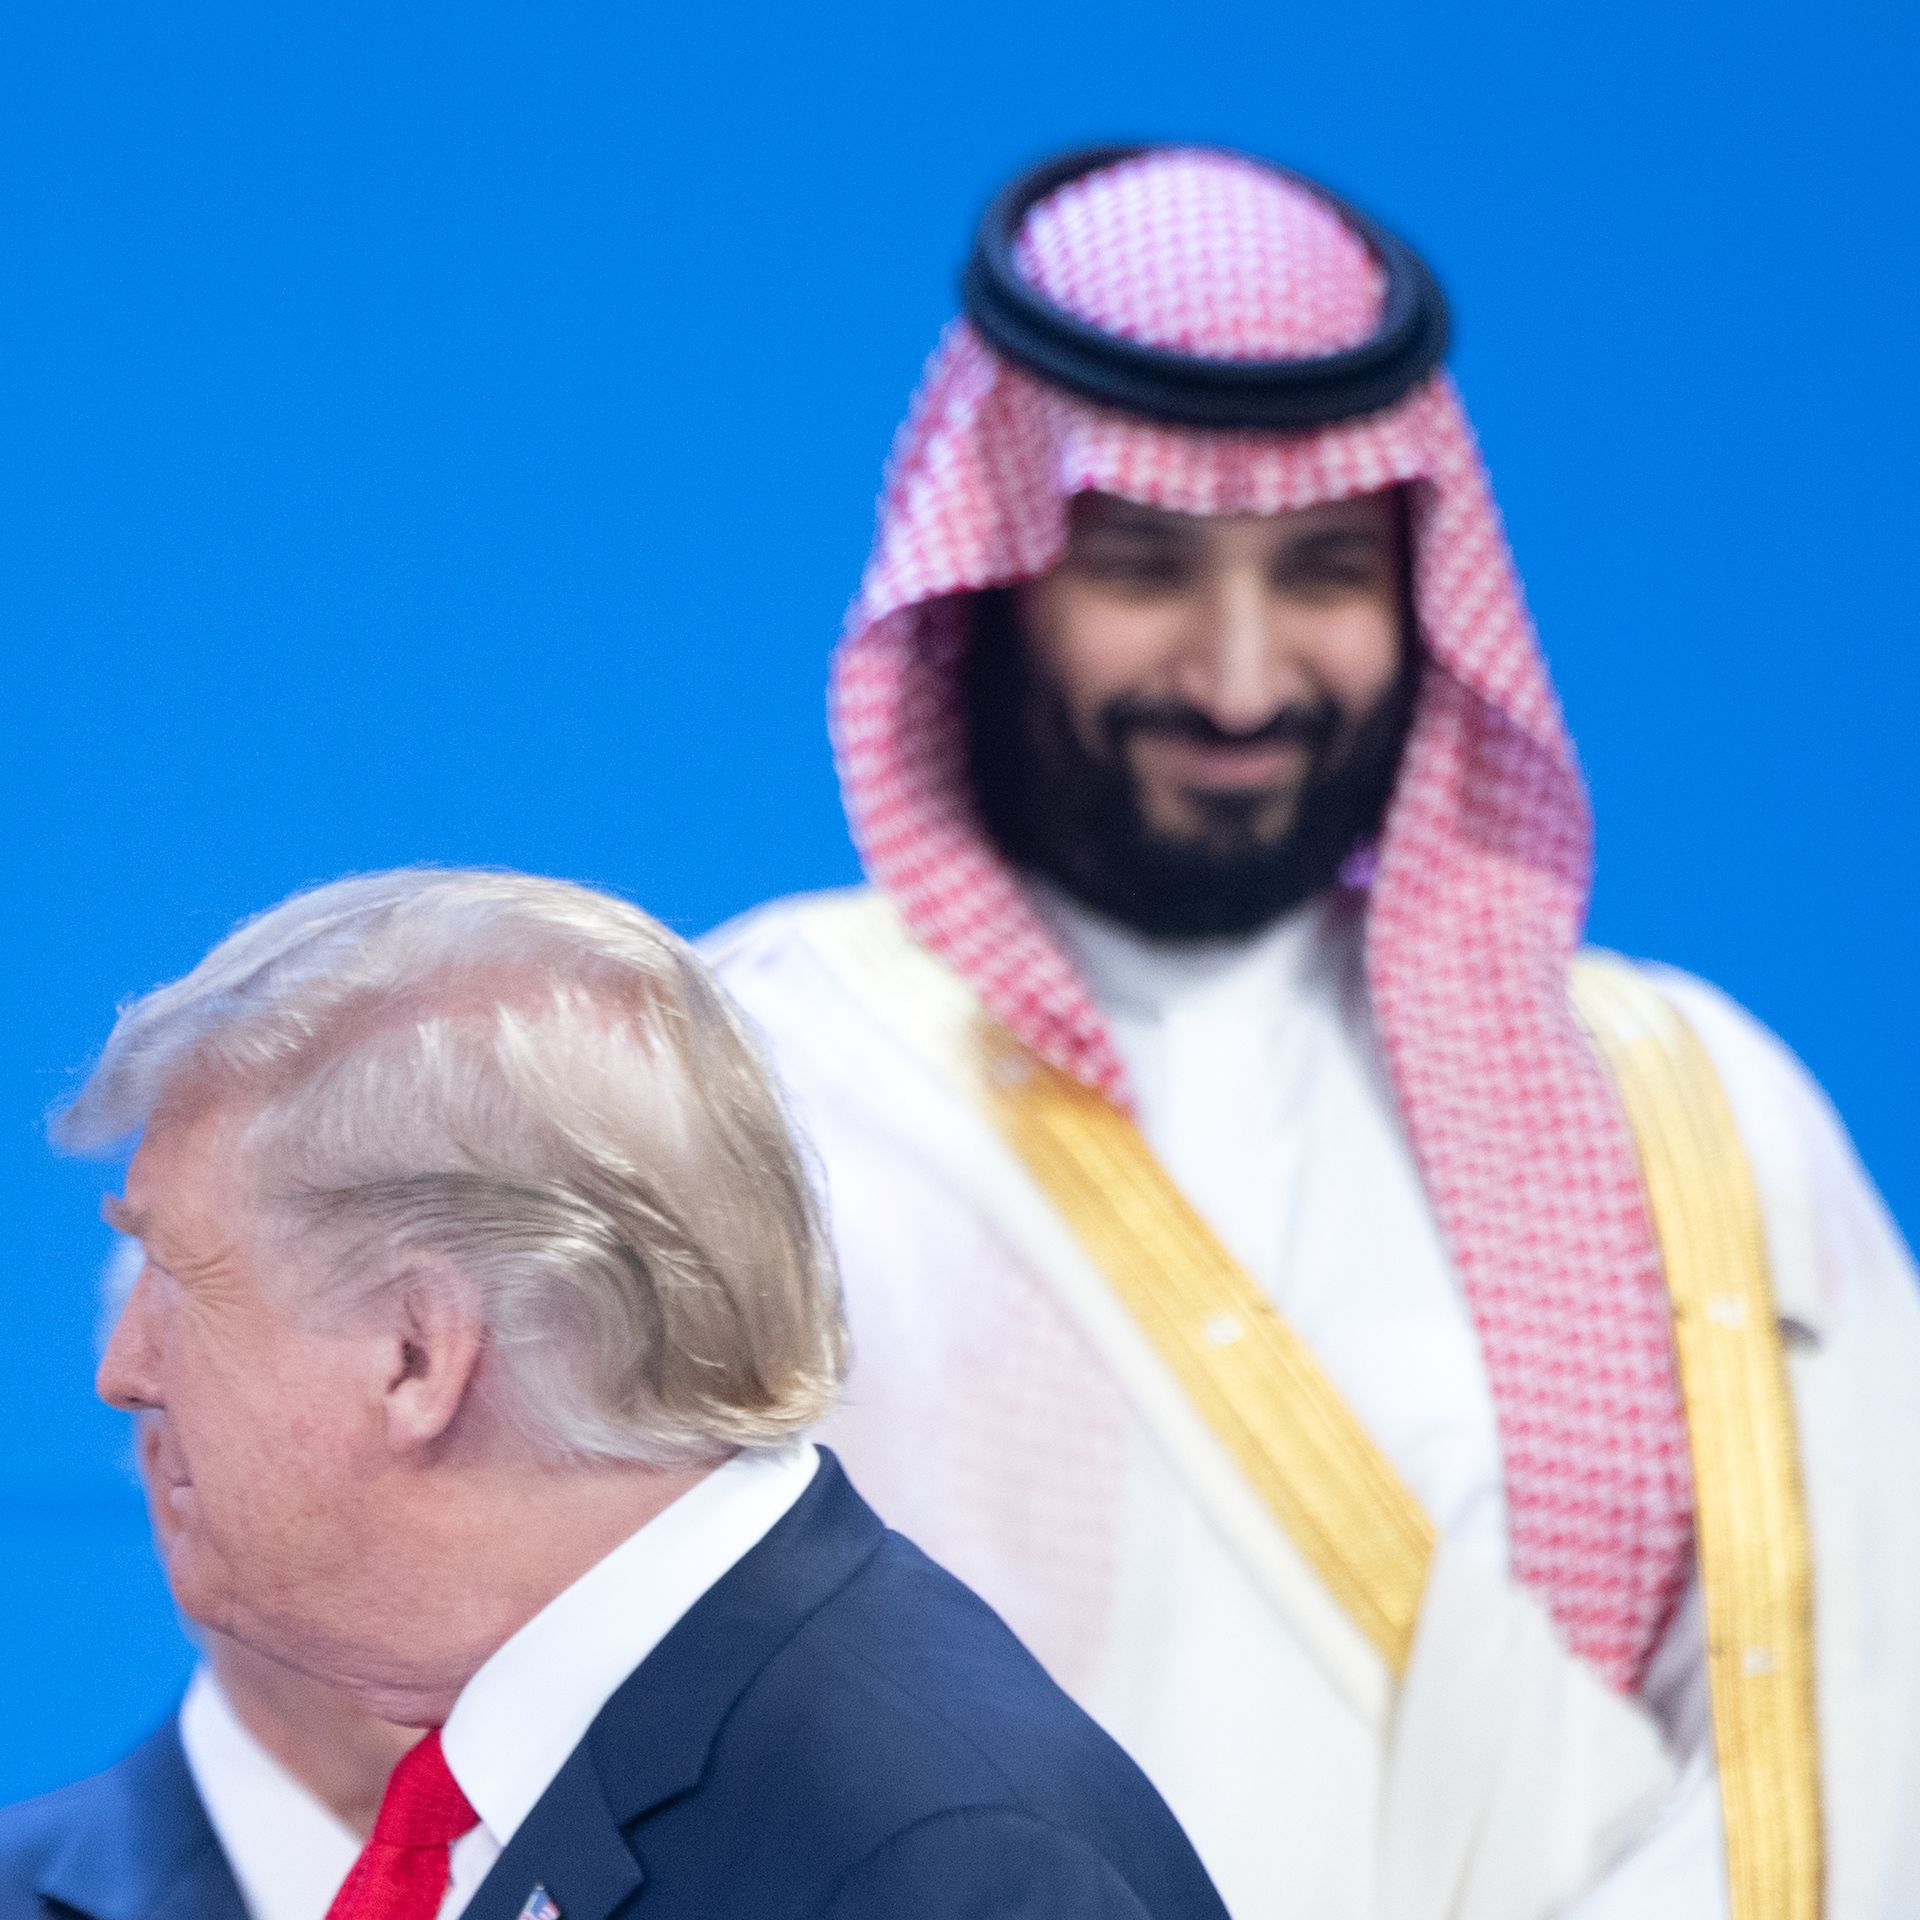 Donald Trump walks past the smiling Mohammed bin Salman at the G20 Summit Meeting Center in Buenos Aires 